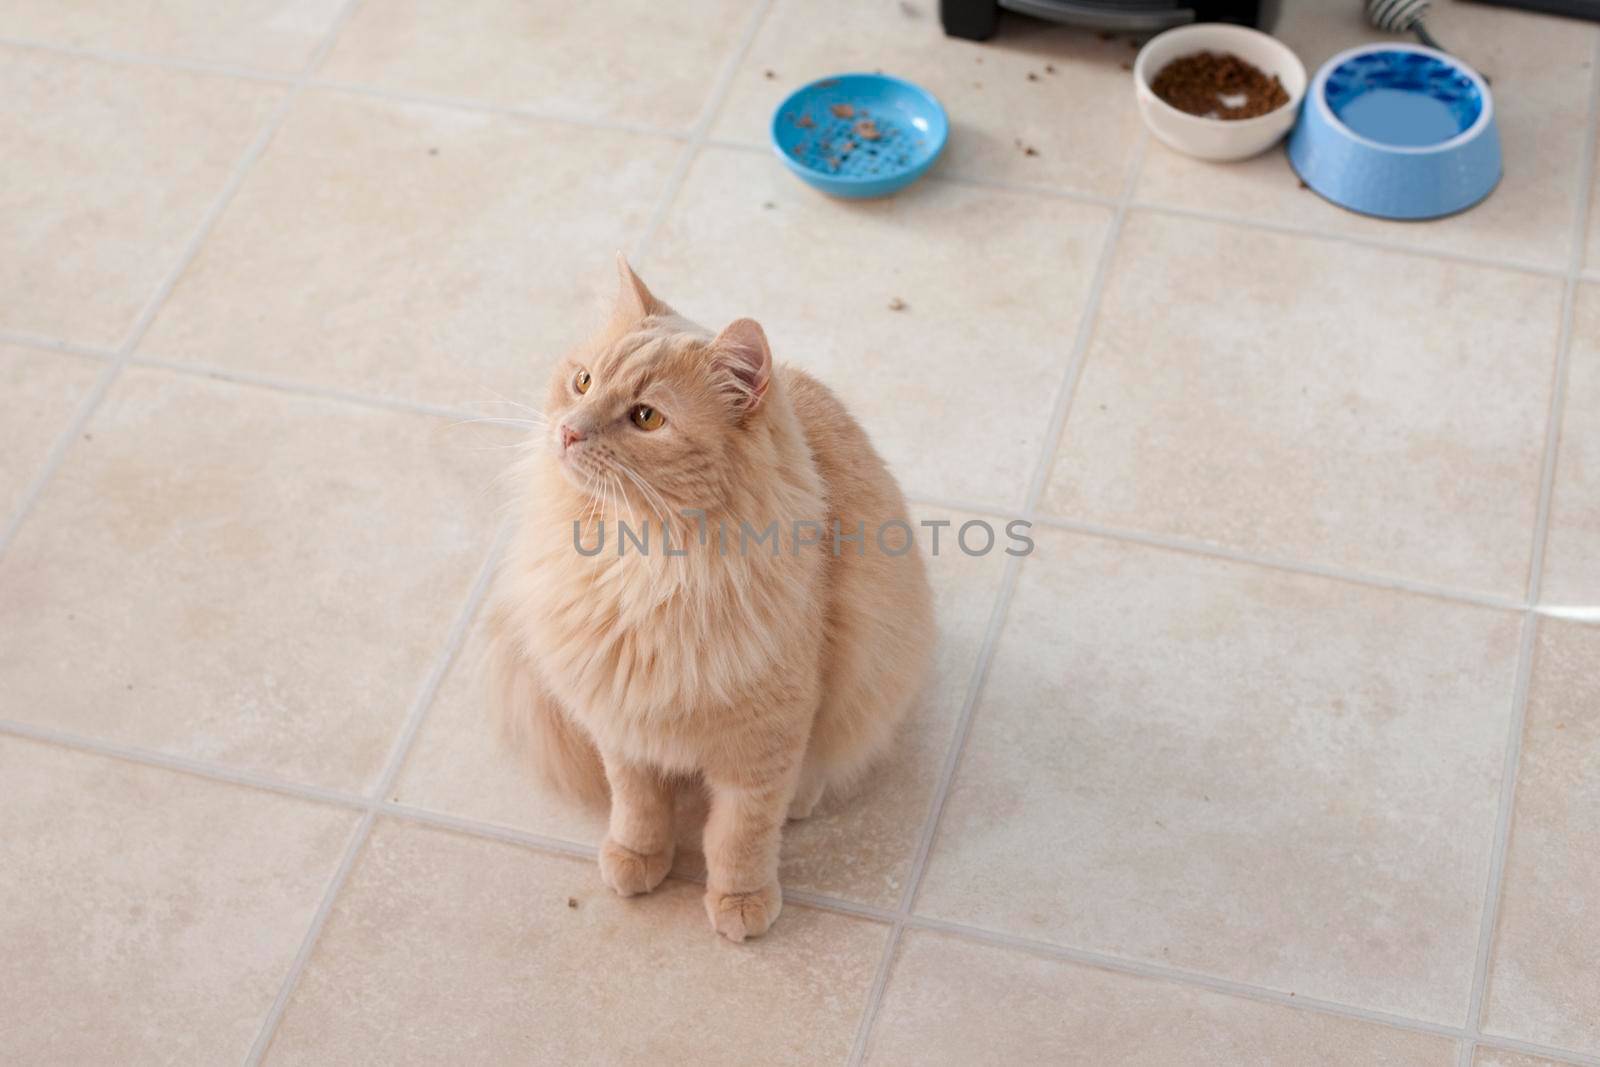  An orange cat sits in front of food dishes